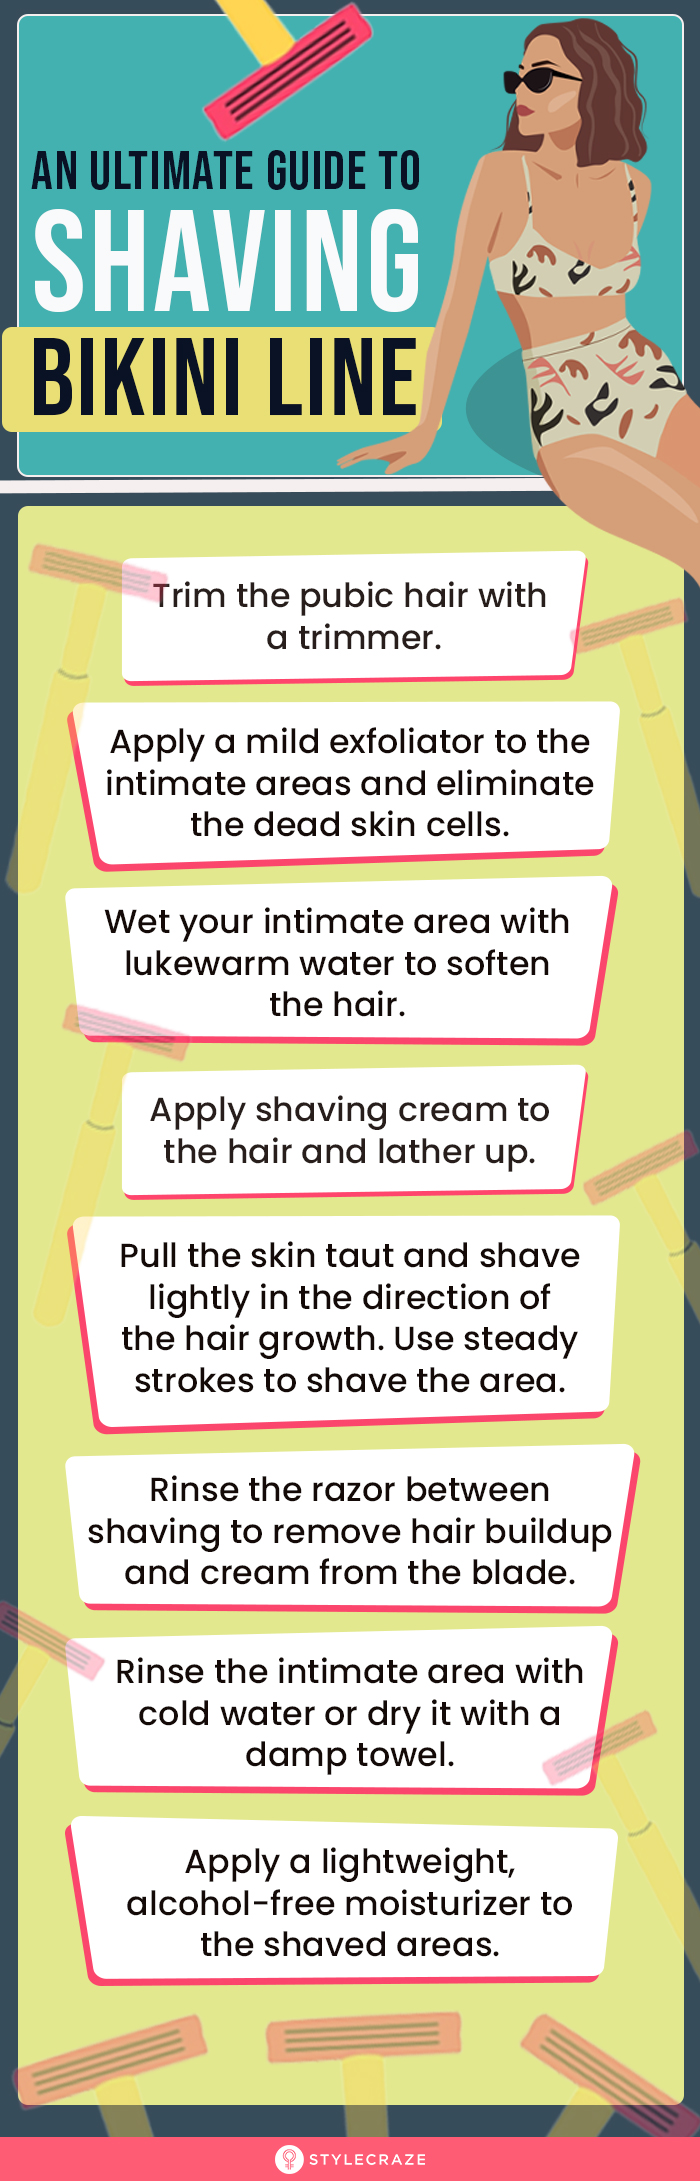 An Ultimate Guide To Shaving Bekini Line[infographic]